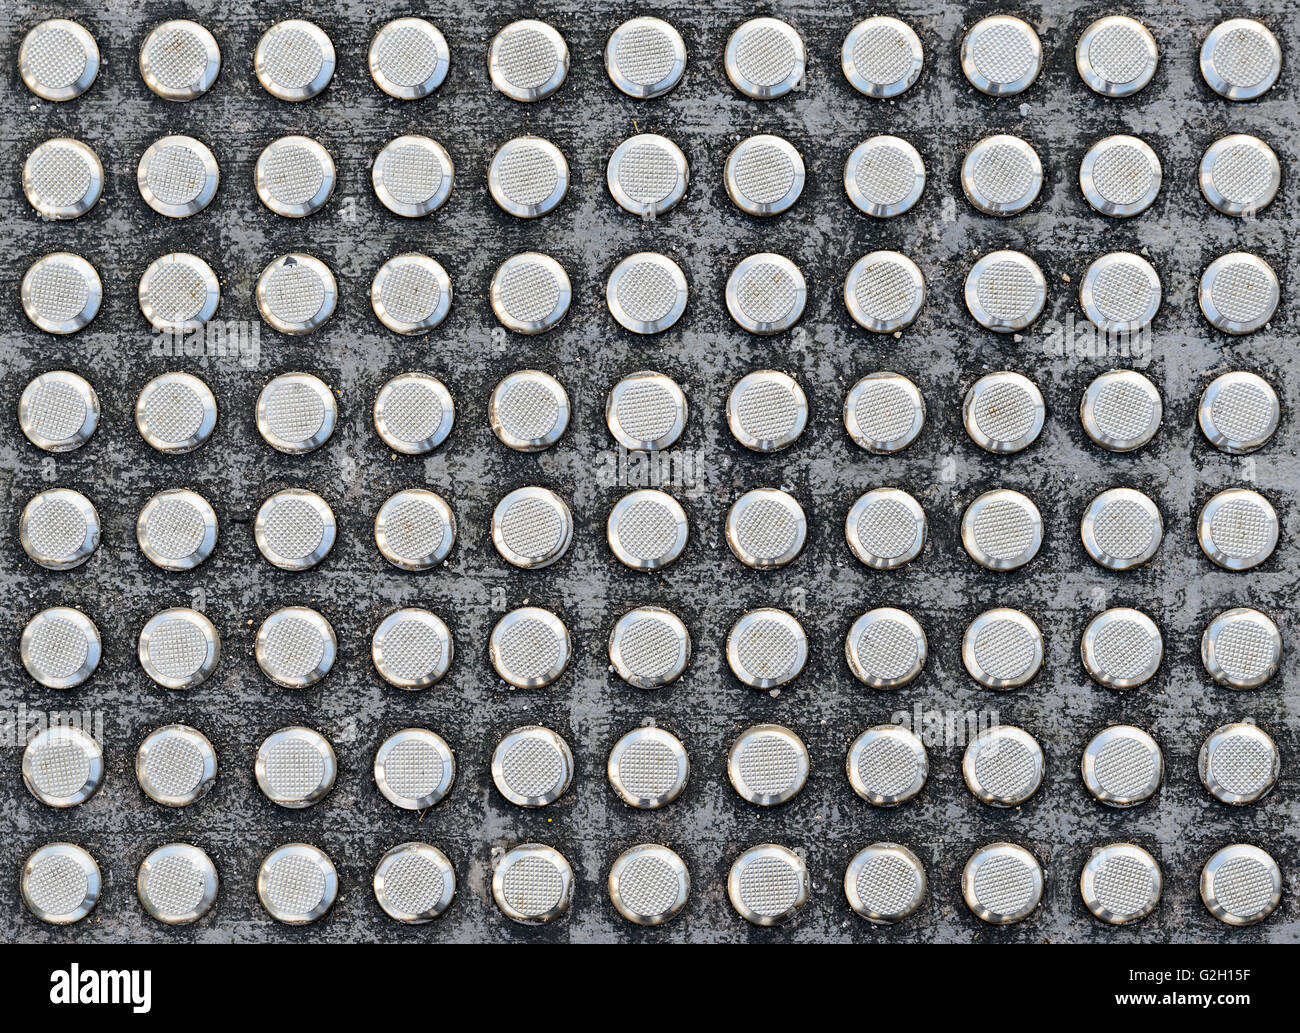 Studs tactile paving textured surface for blind or visually impaired people at a pedestrian crossing Stock Photo